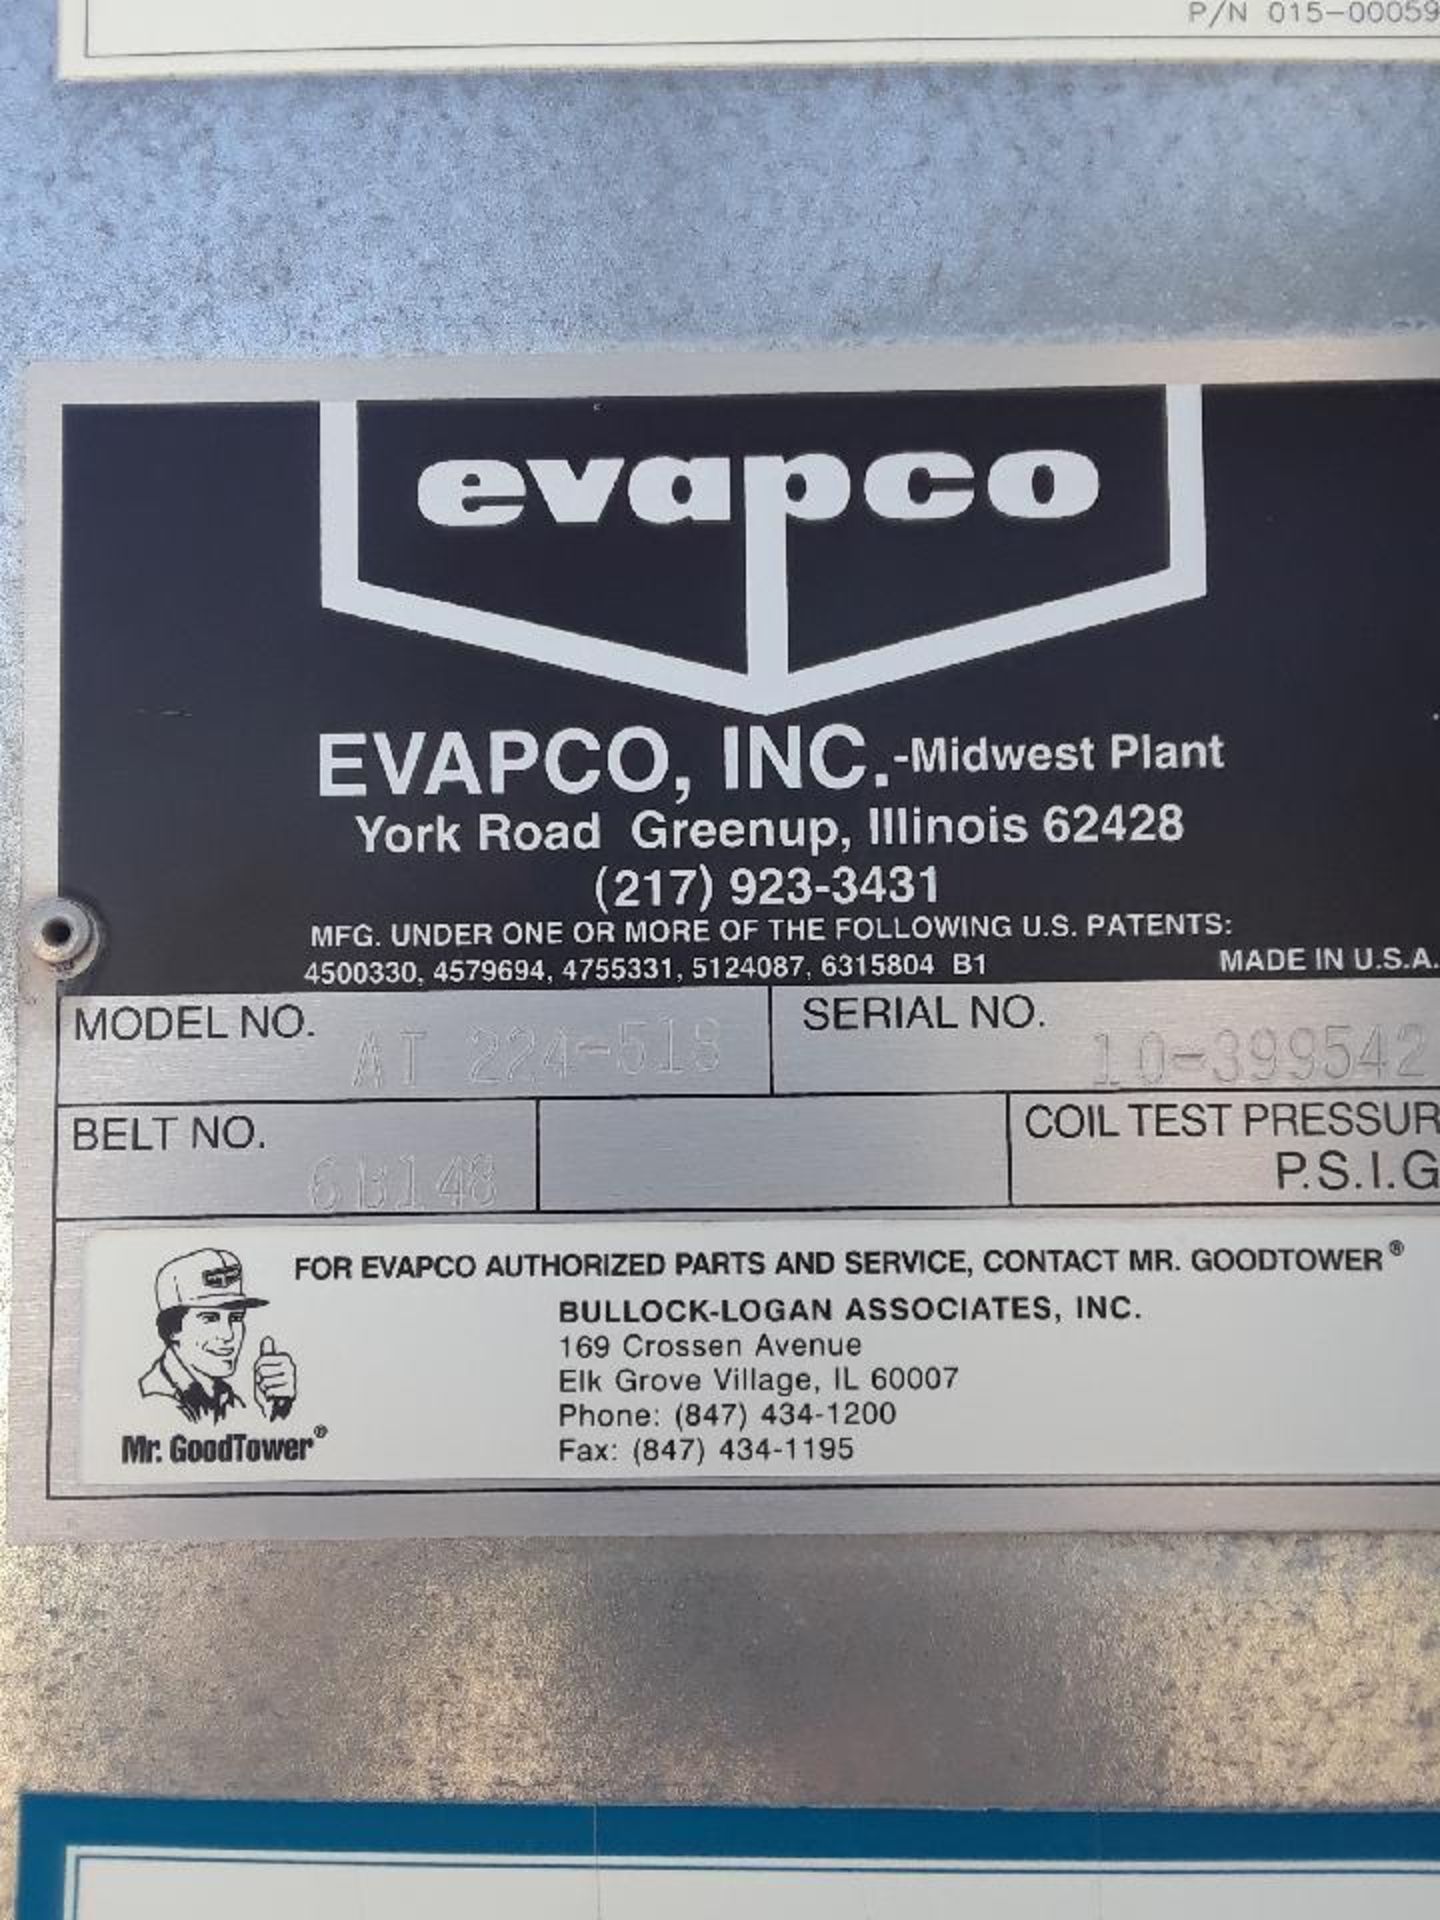 Evapco cooling tower, mn AT 224-518, sn 10-399542 with controls - located on roof - Image 4 of 4